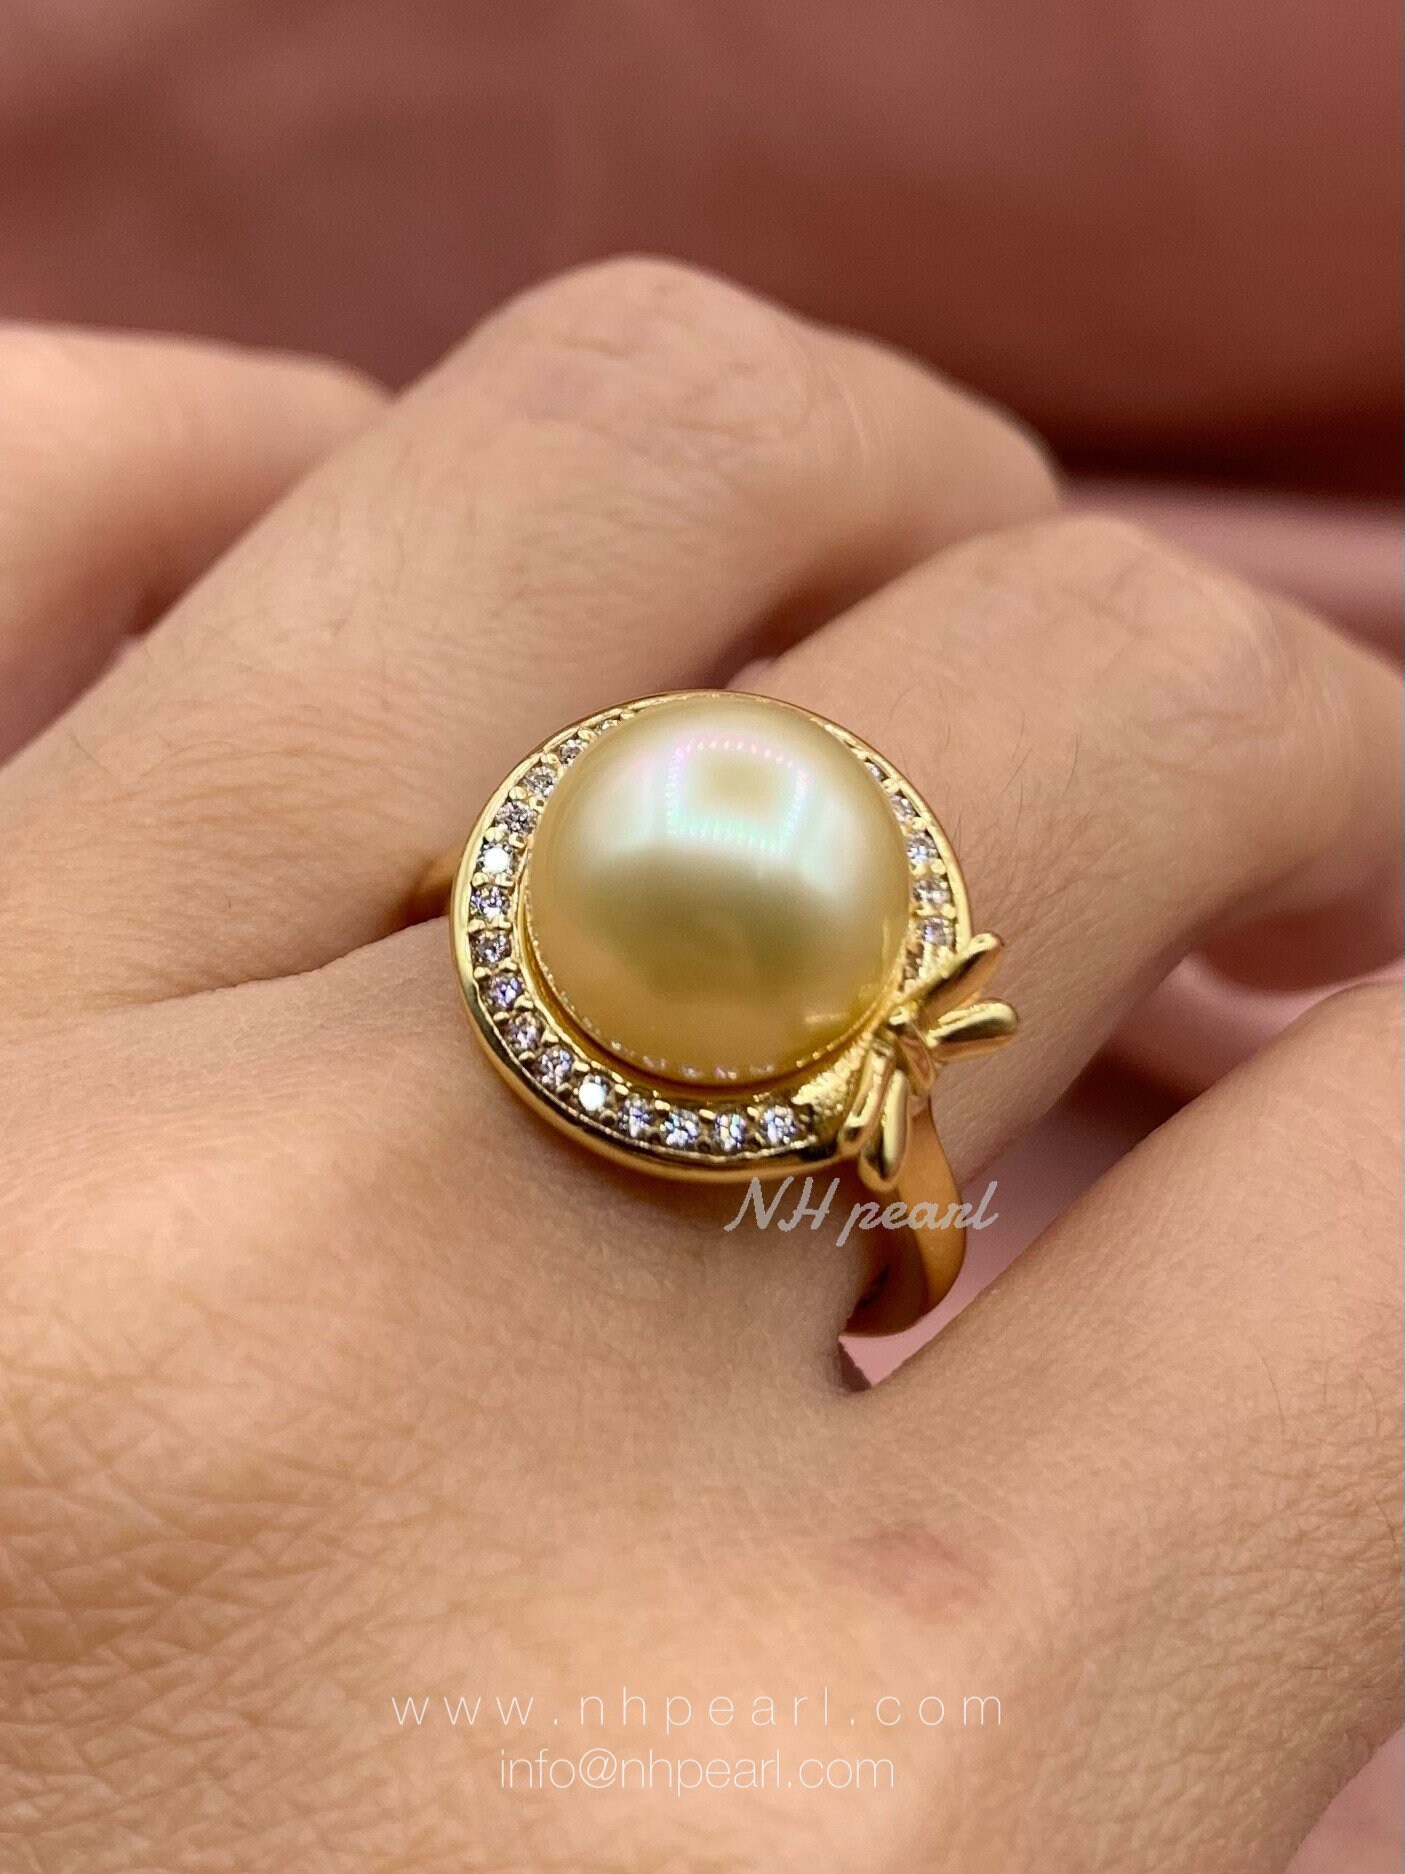 Round Golden South Sea Pearl With Elegant S925 Sterling Silver